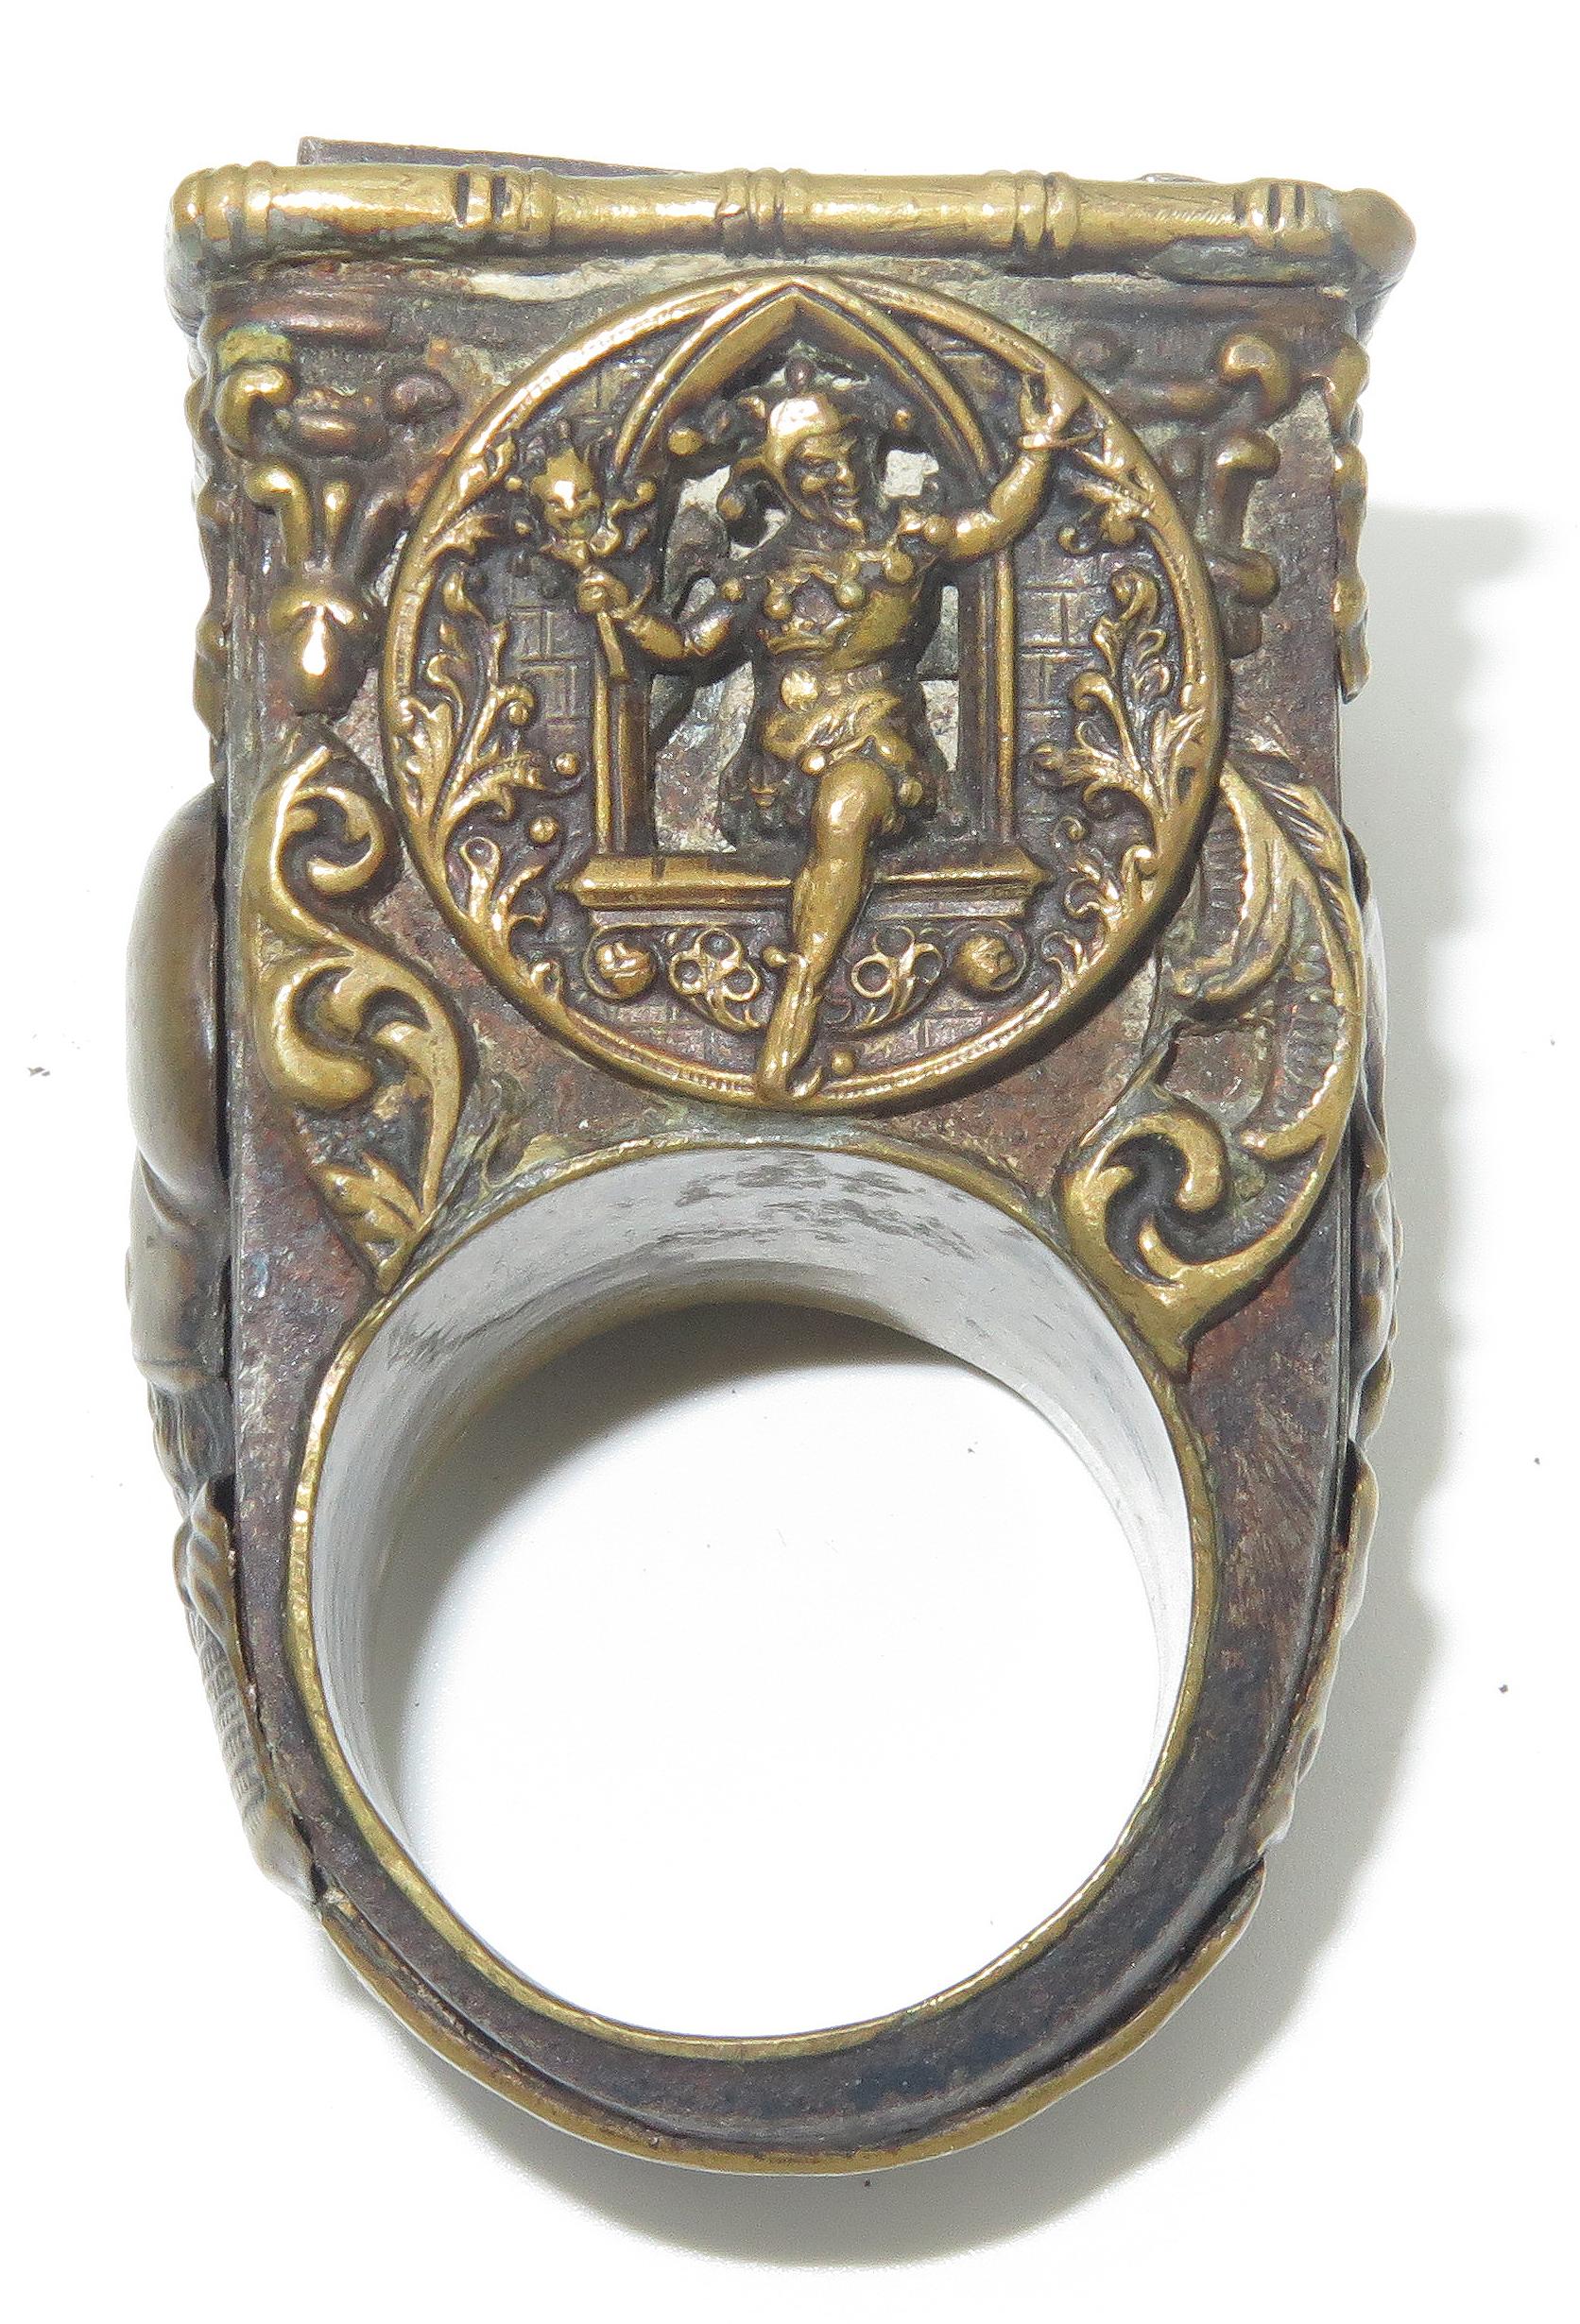 A beautifully designed, historic Bishop’s ring consisting of blended metals. Great craftsmanship throughout the ring, decorated on all four sides with high relief designs. The engraved lid hinges to reveal a secret compartment at the top, (often